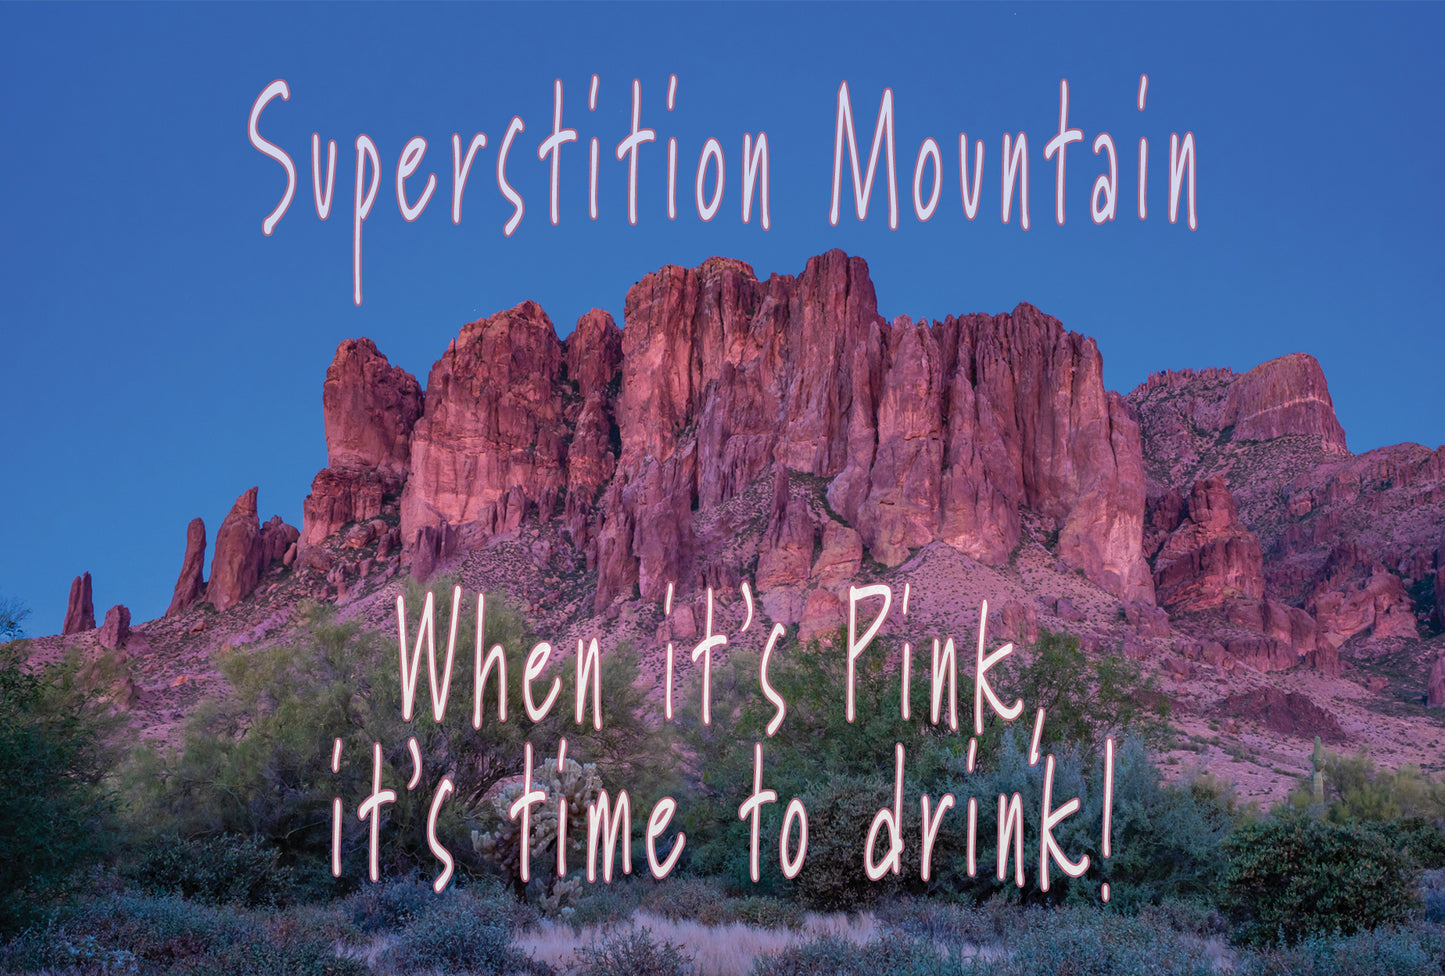 Superstition Mountain Sunset When It's Pink It's Time to Drink Postcard